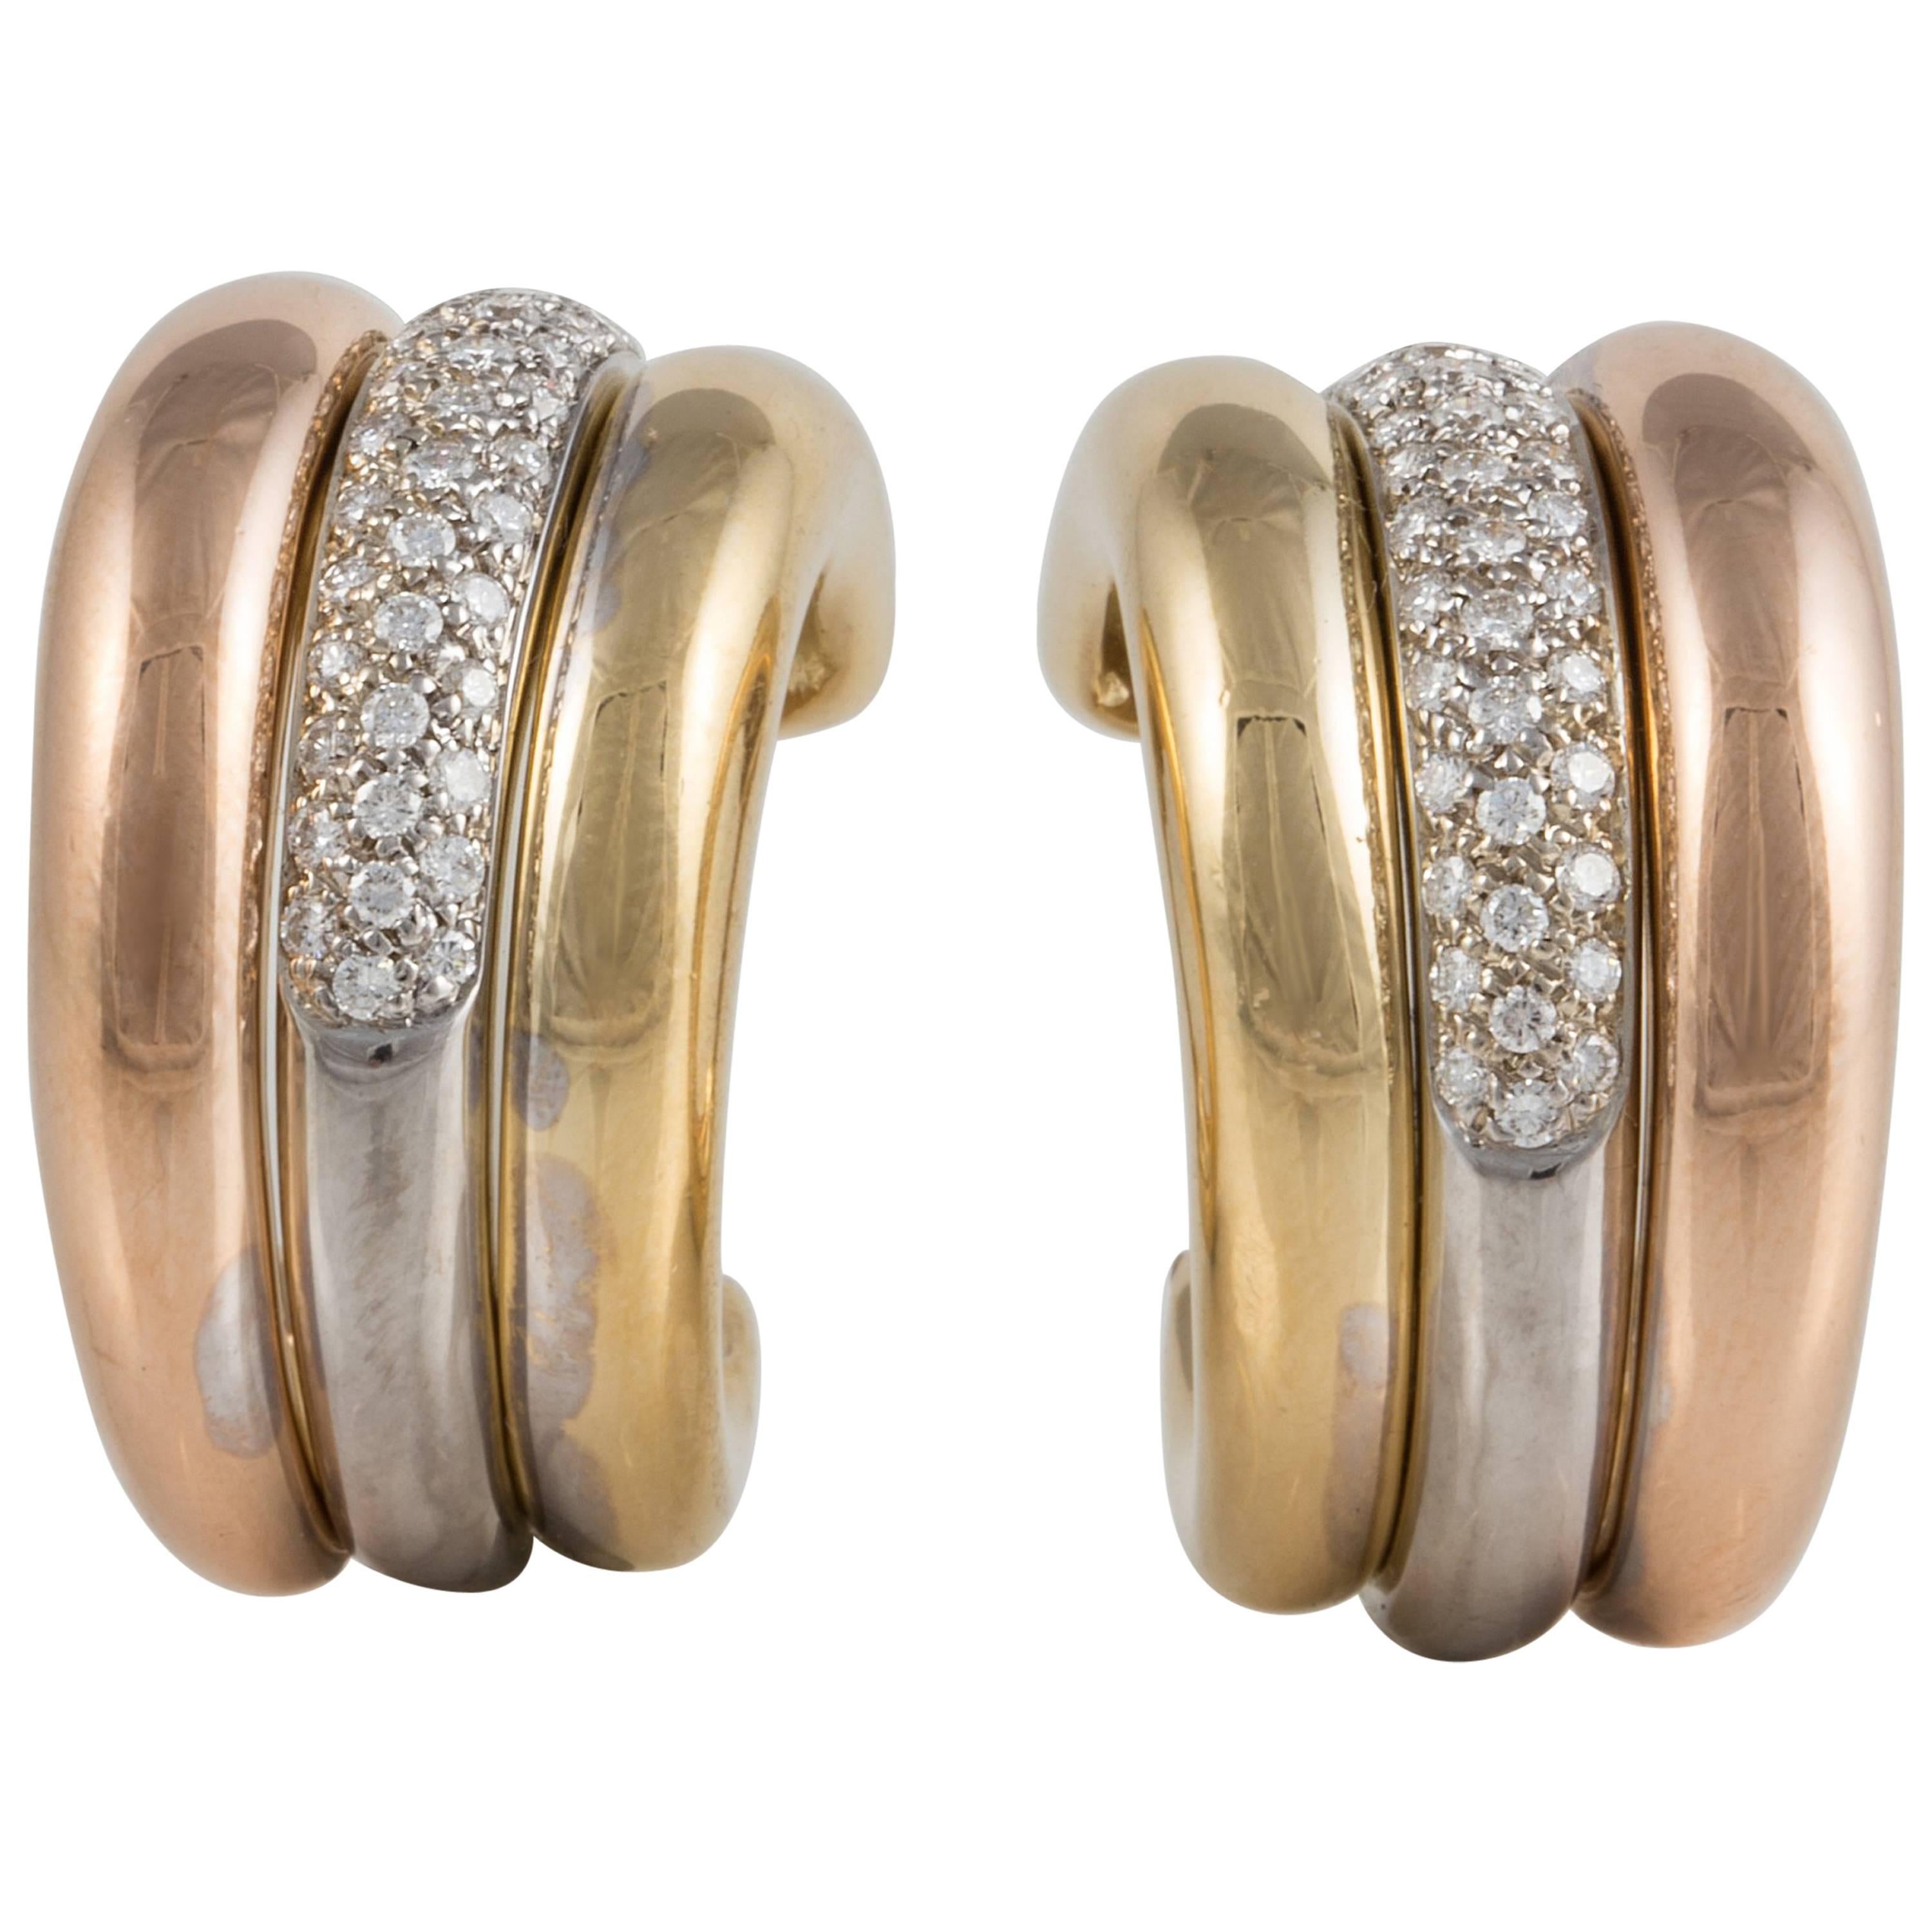 Cartier Trinity Earrings in Tri-Color Gold and Diamonds